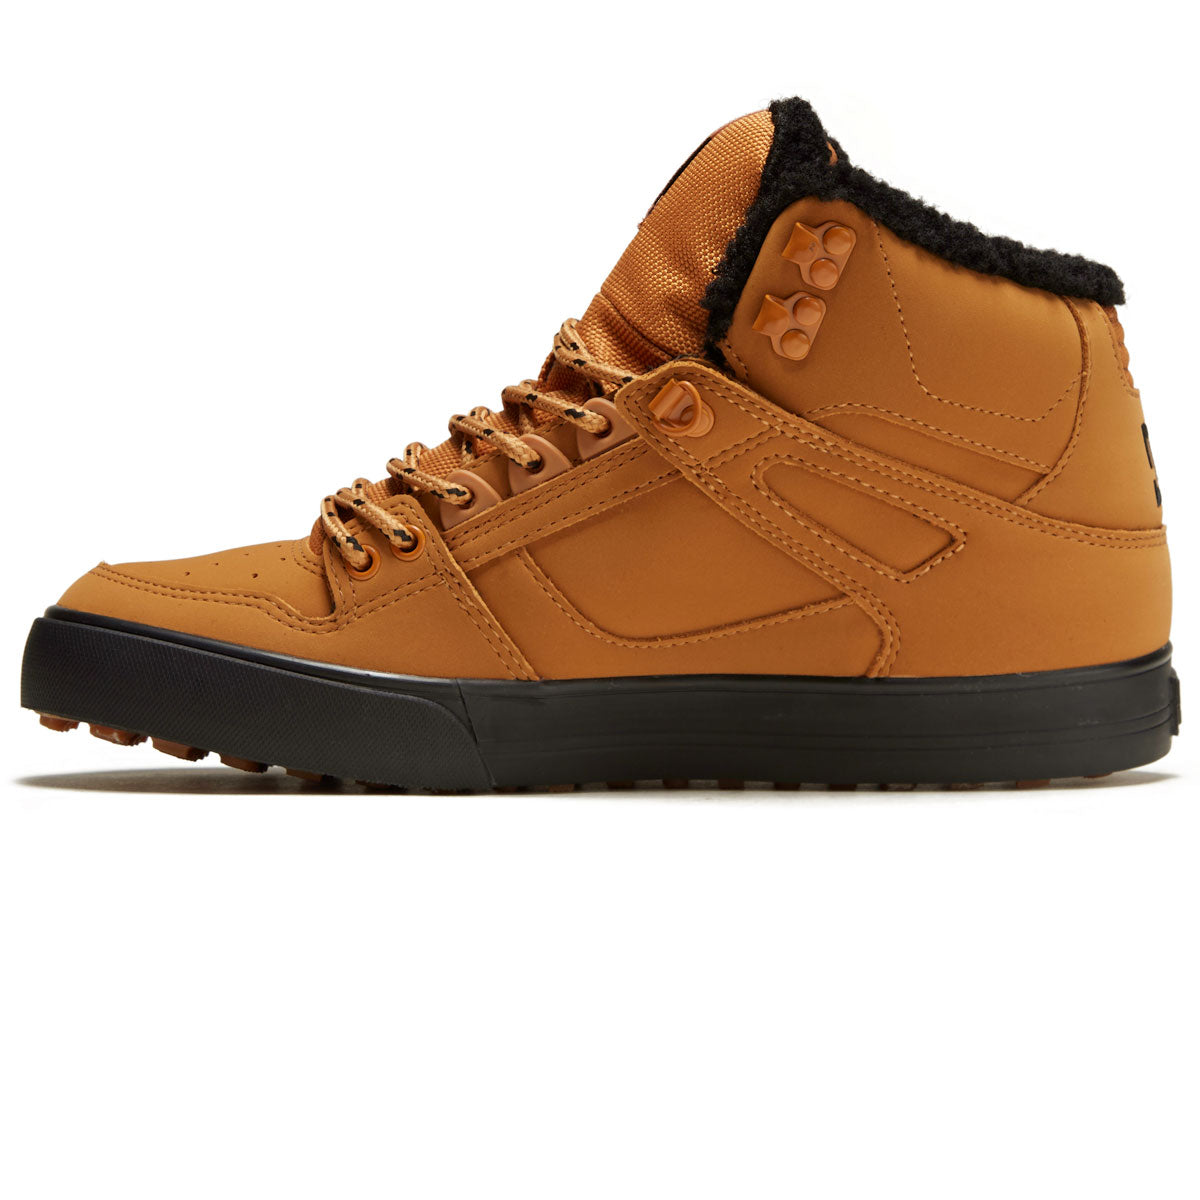 DC Pure High-top Wc Winter Shoes - Wheat/Black image 2